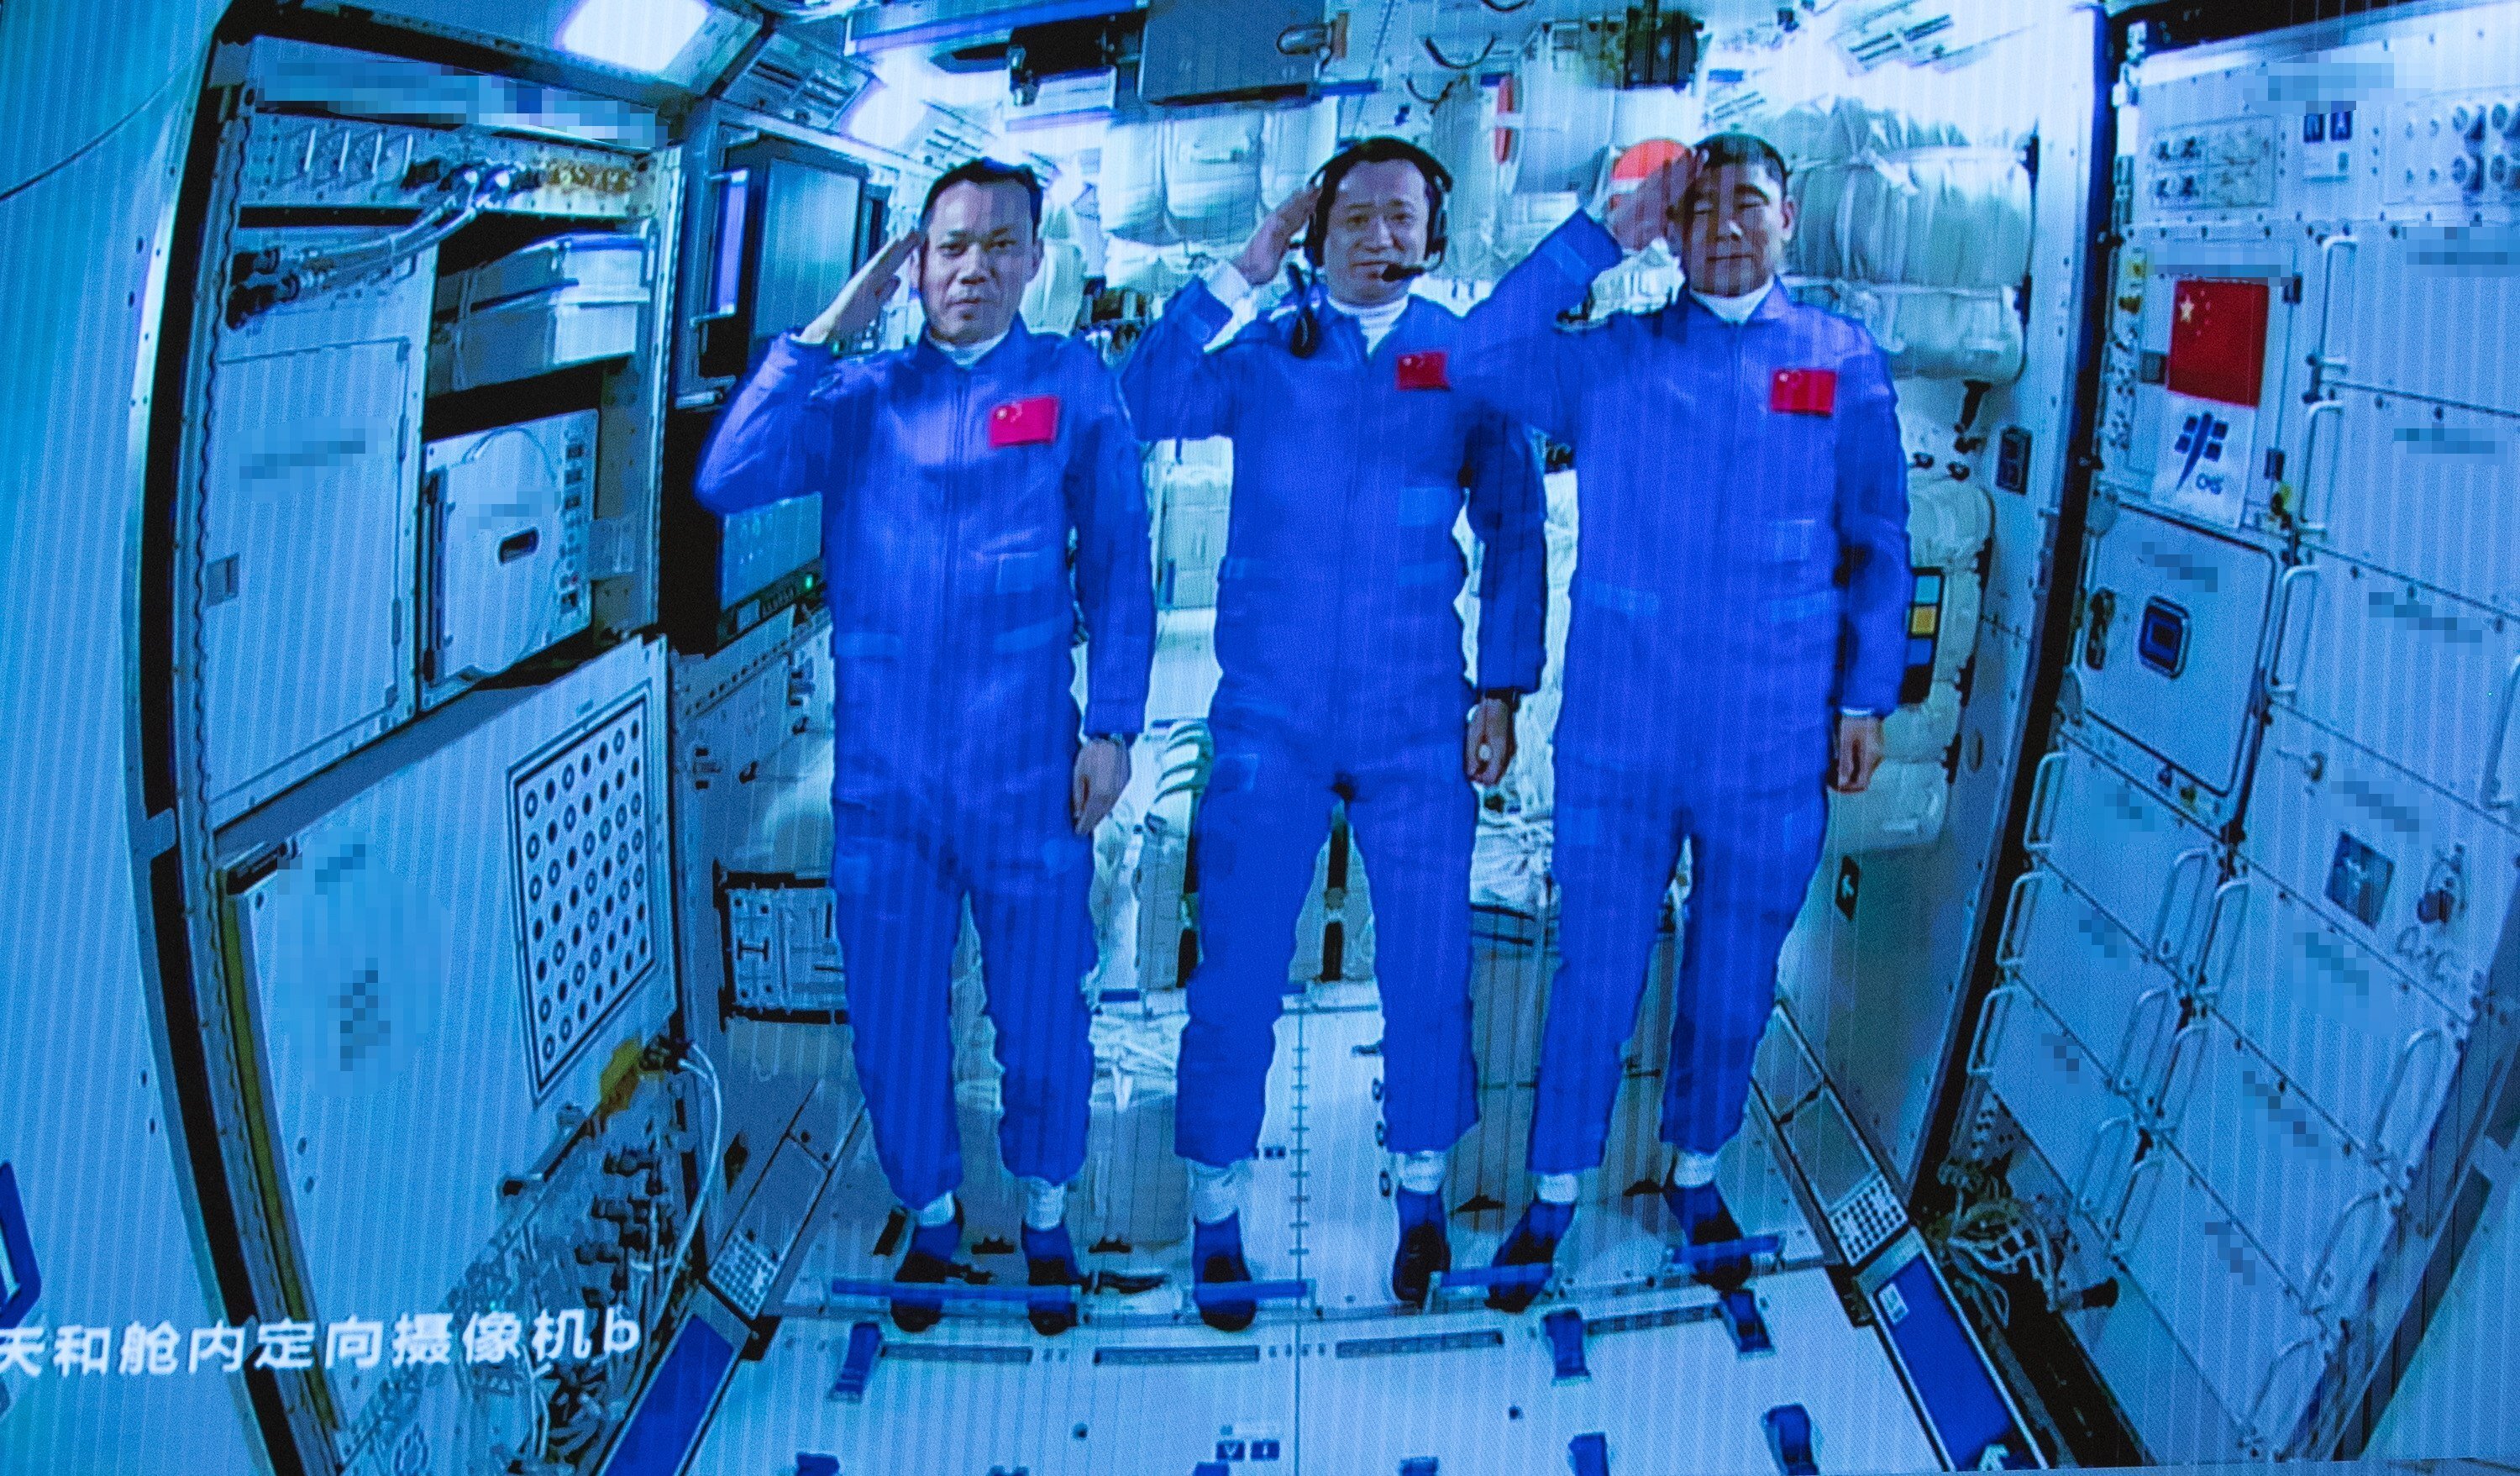 Three Chinese astronauts onboard the Shenzhou-12 spaceship salute after entering the Tianhe space station core module on June 17, 2021. Photo: EPA-EFE